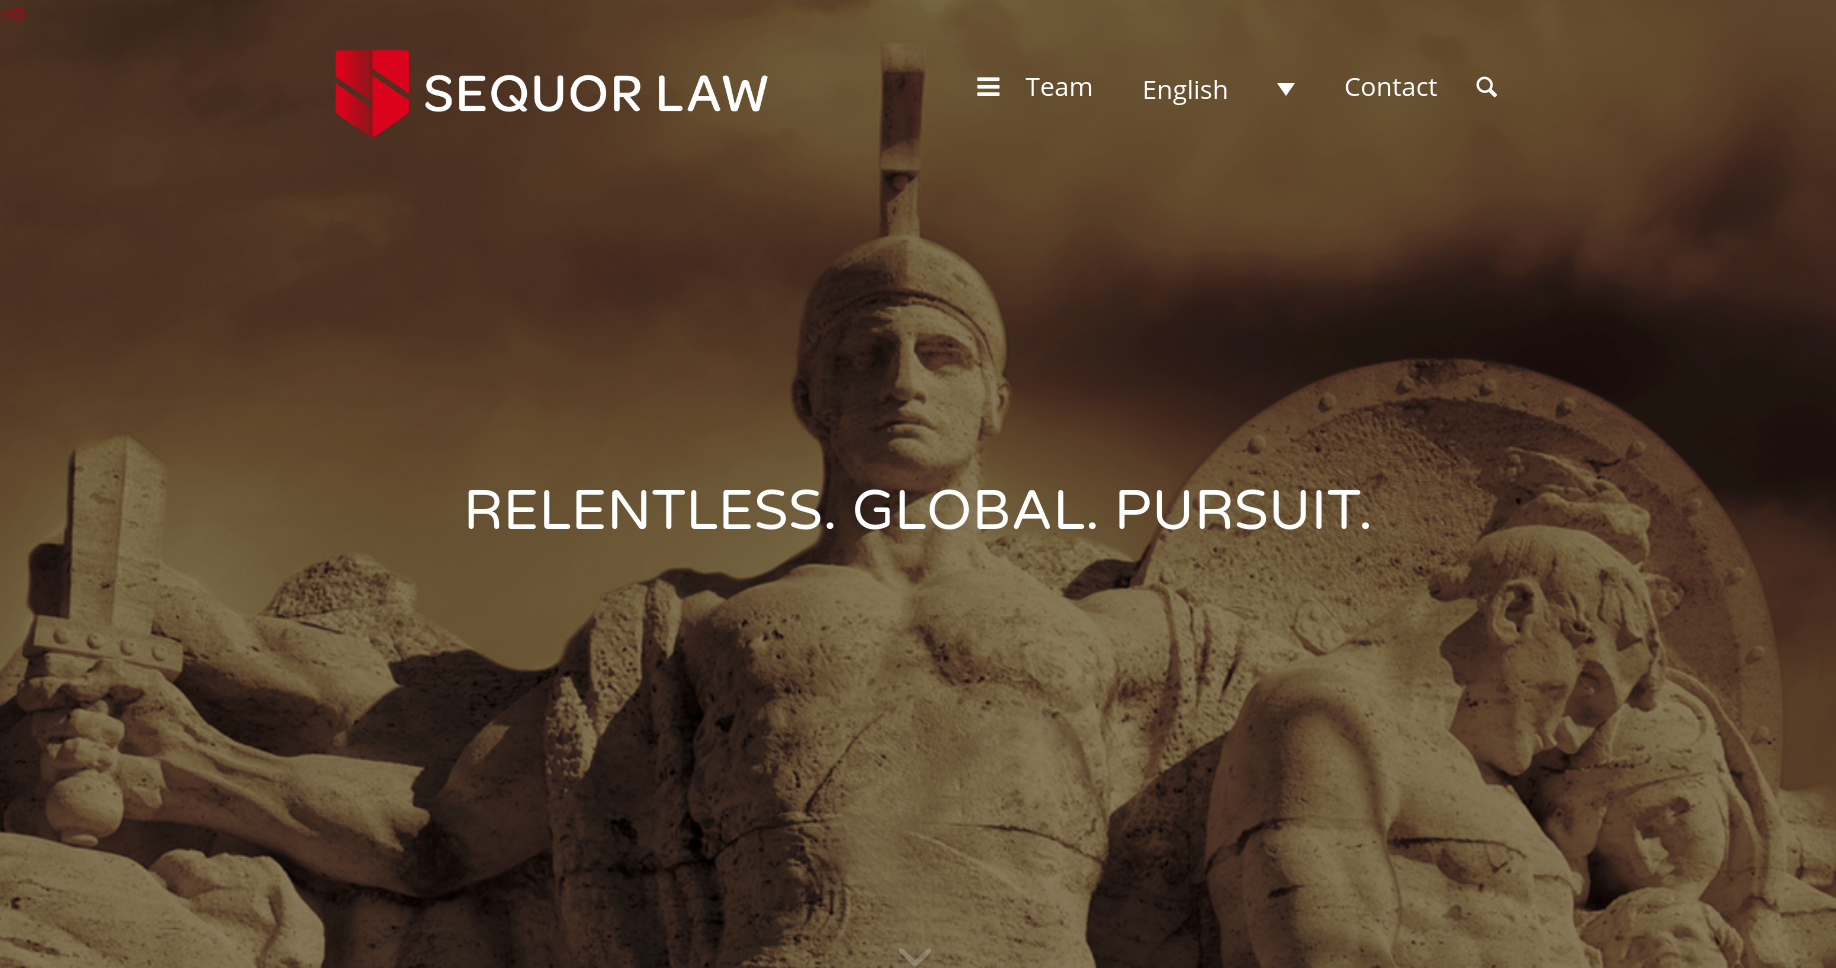 stone statue of gladiator with Sequor Law logo and headline "RELENTLESS. GLOBAL. PURSUIT."